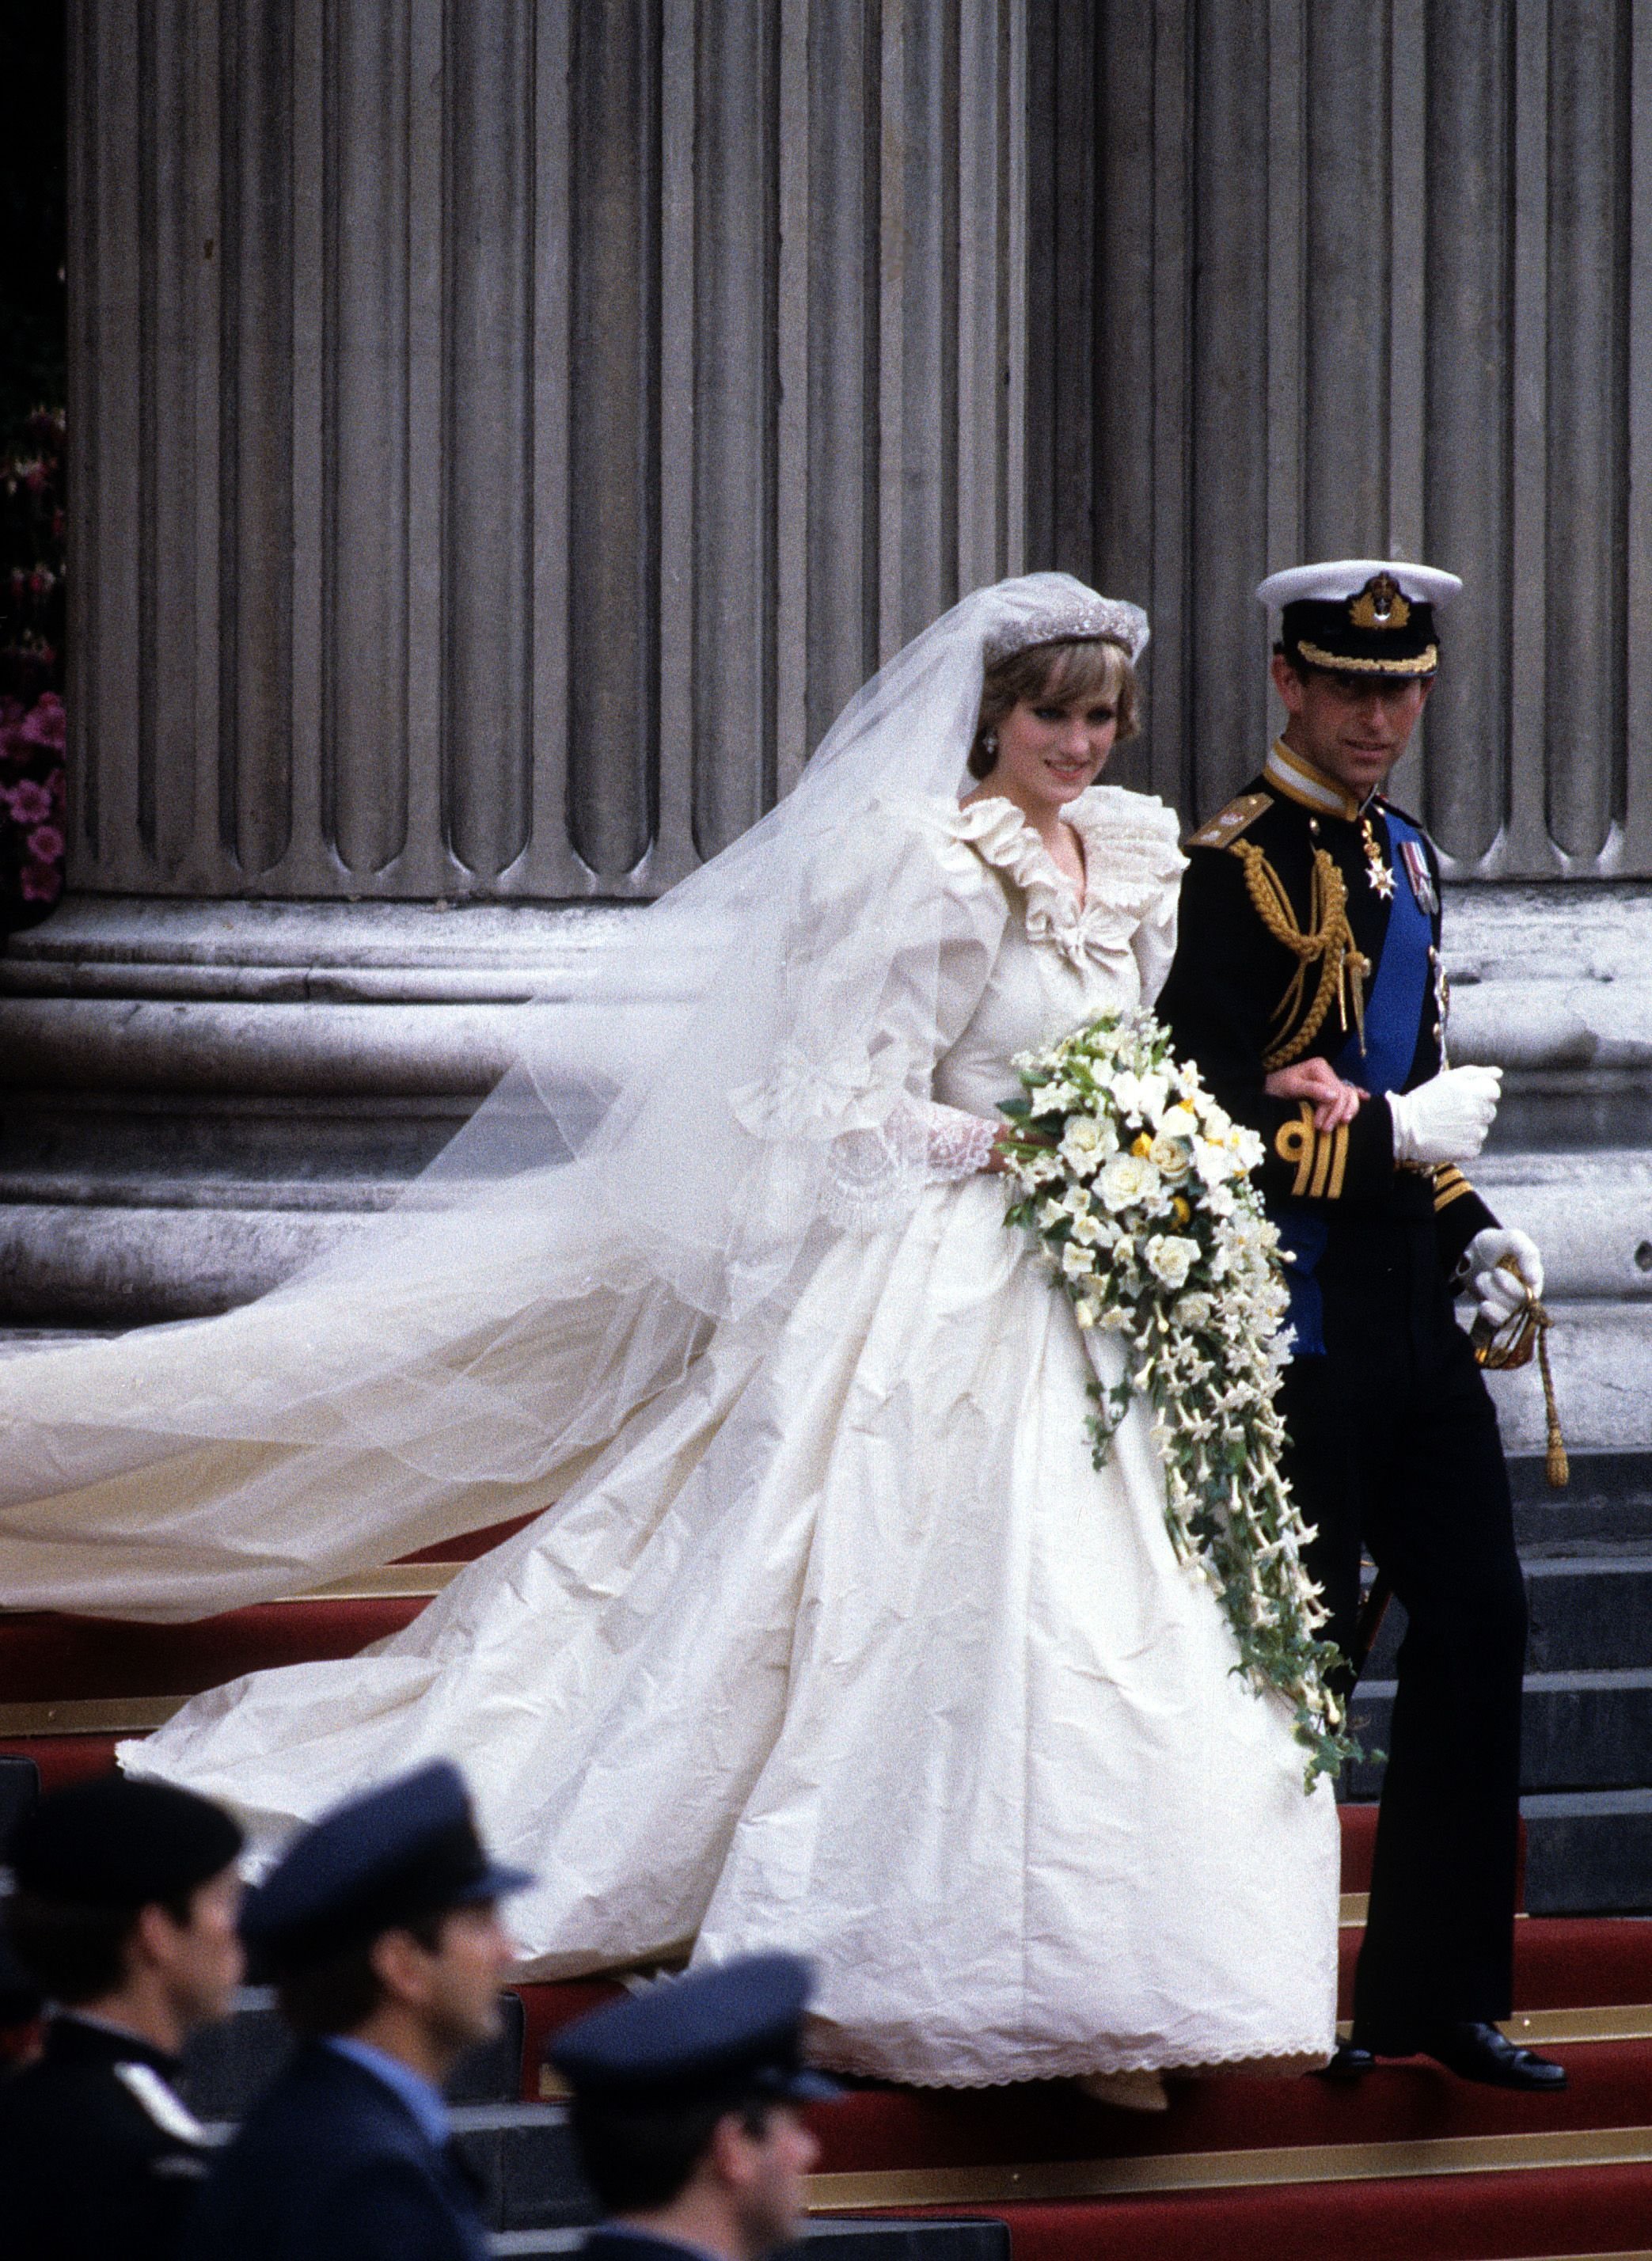 Princess DIana and Prince Charles on their wedding day, July 29, 1981| Source: Getty Images